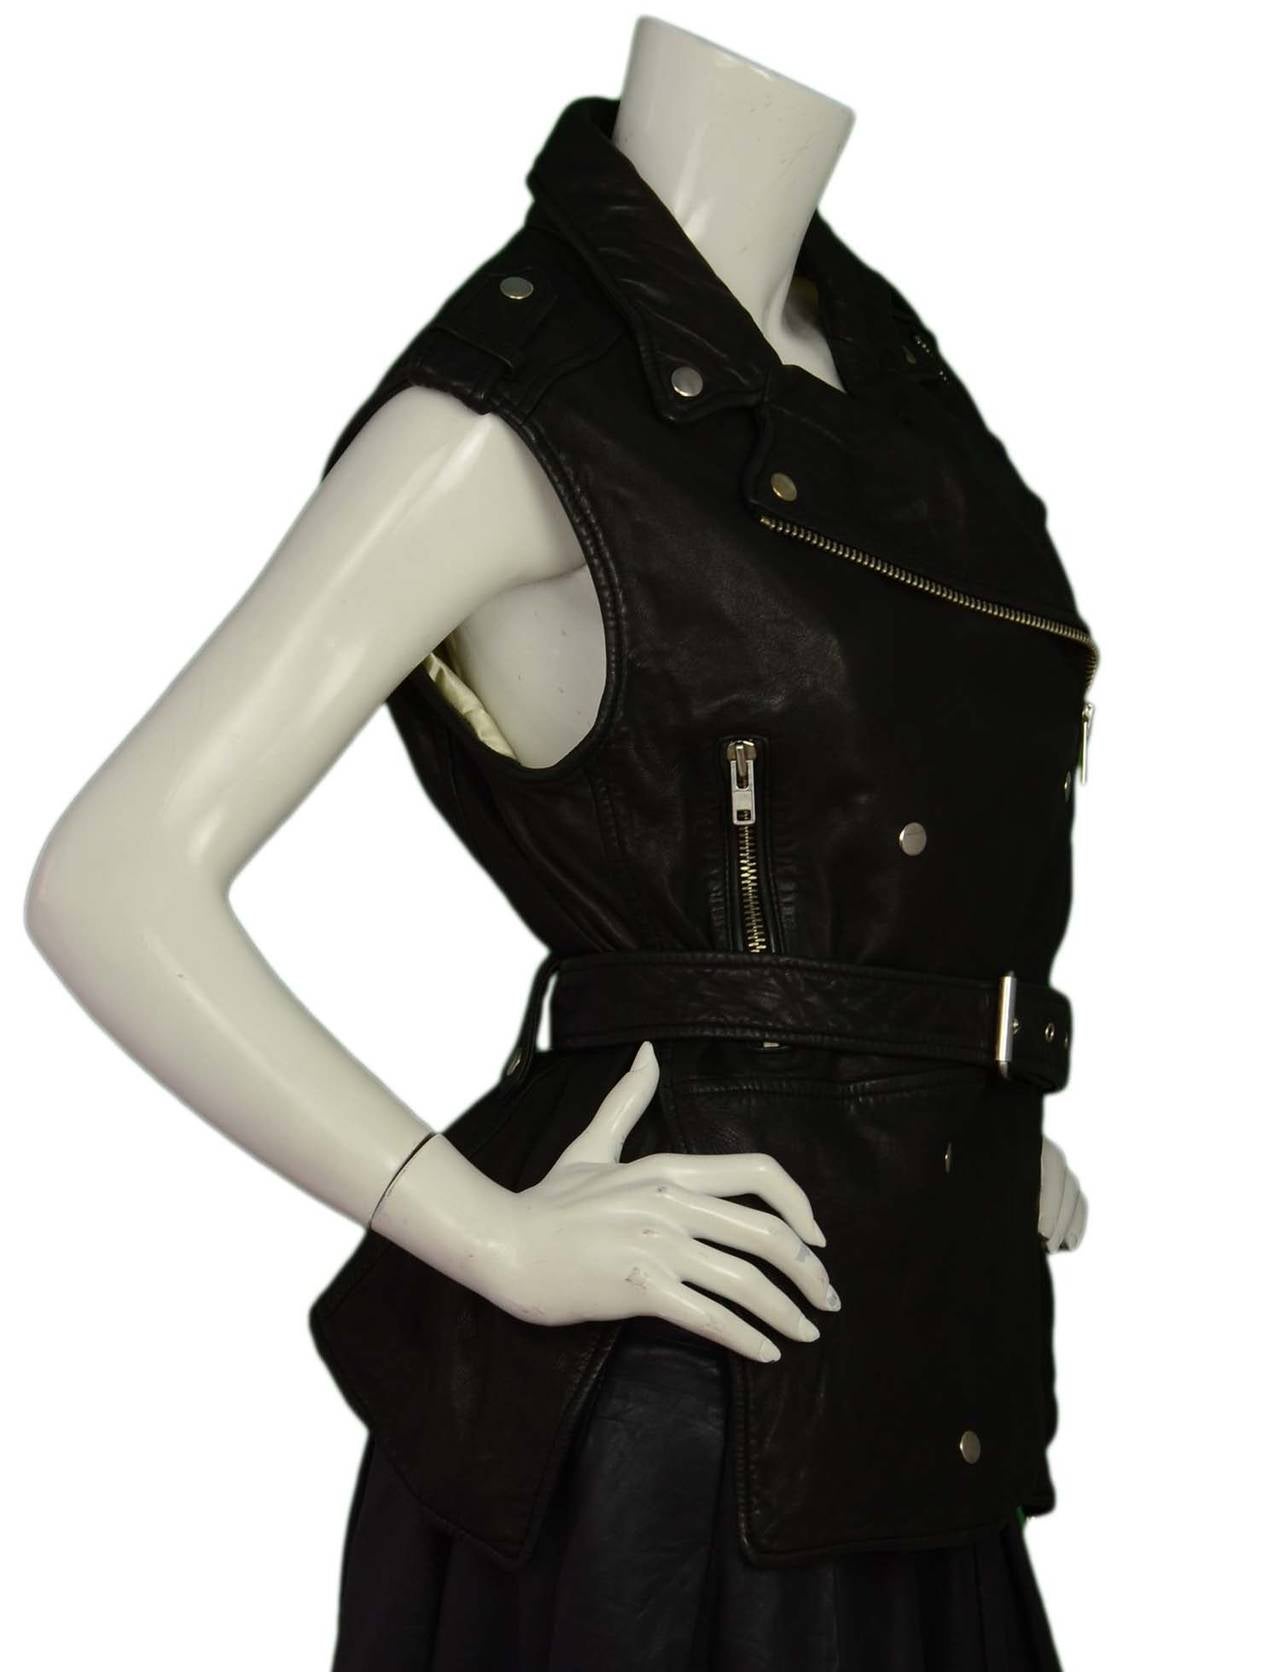 Features double breasted snap and zipper closure with side slits.

-Made in: India
-Color: Black with silver hardware
-Composition: 100% Distressed Lambskin
-Lining Composition: Quilted 100% Polyester
-Closure/opening: Zip/snap with adjustable